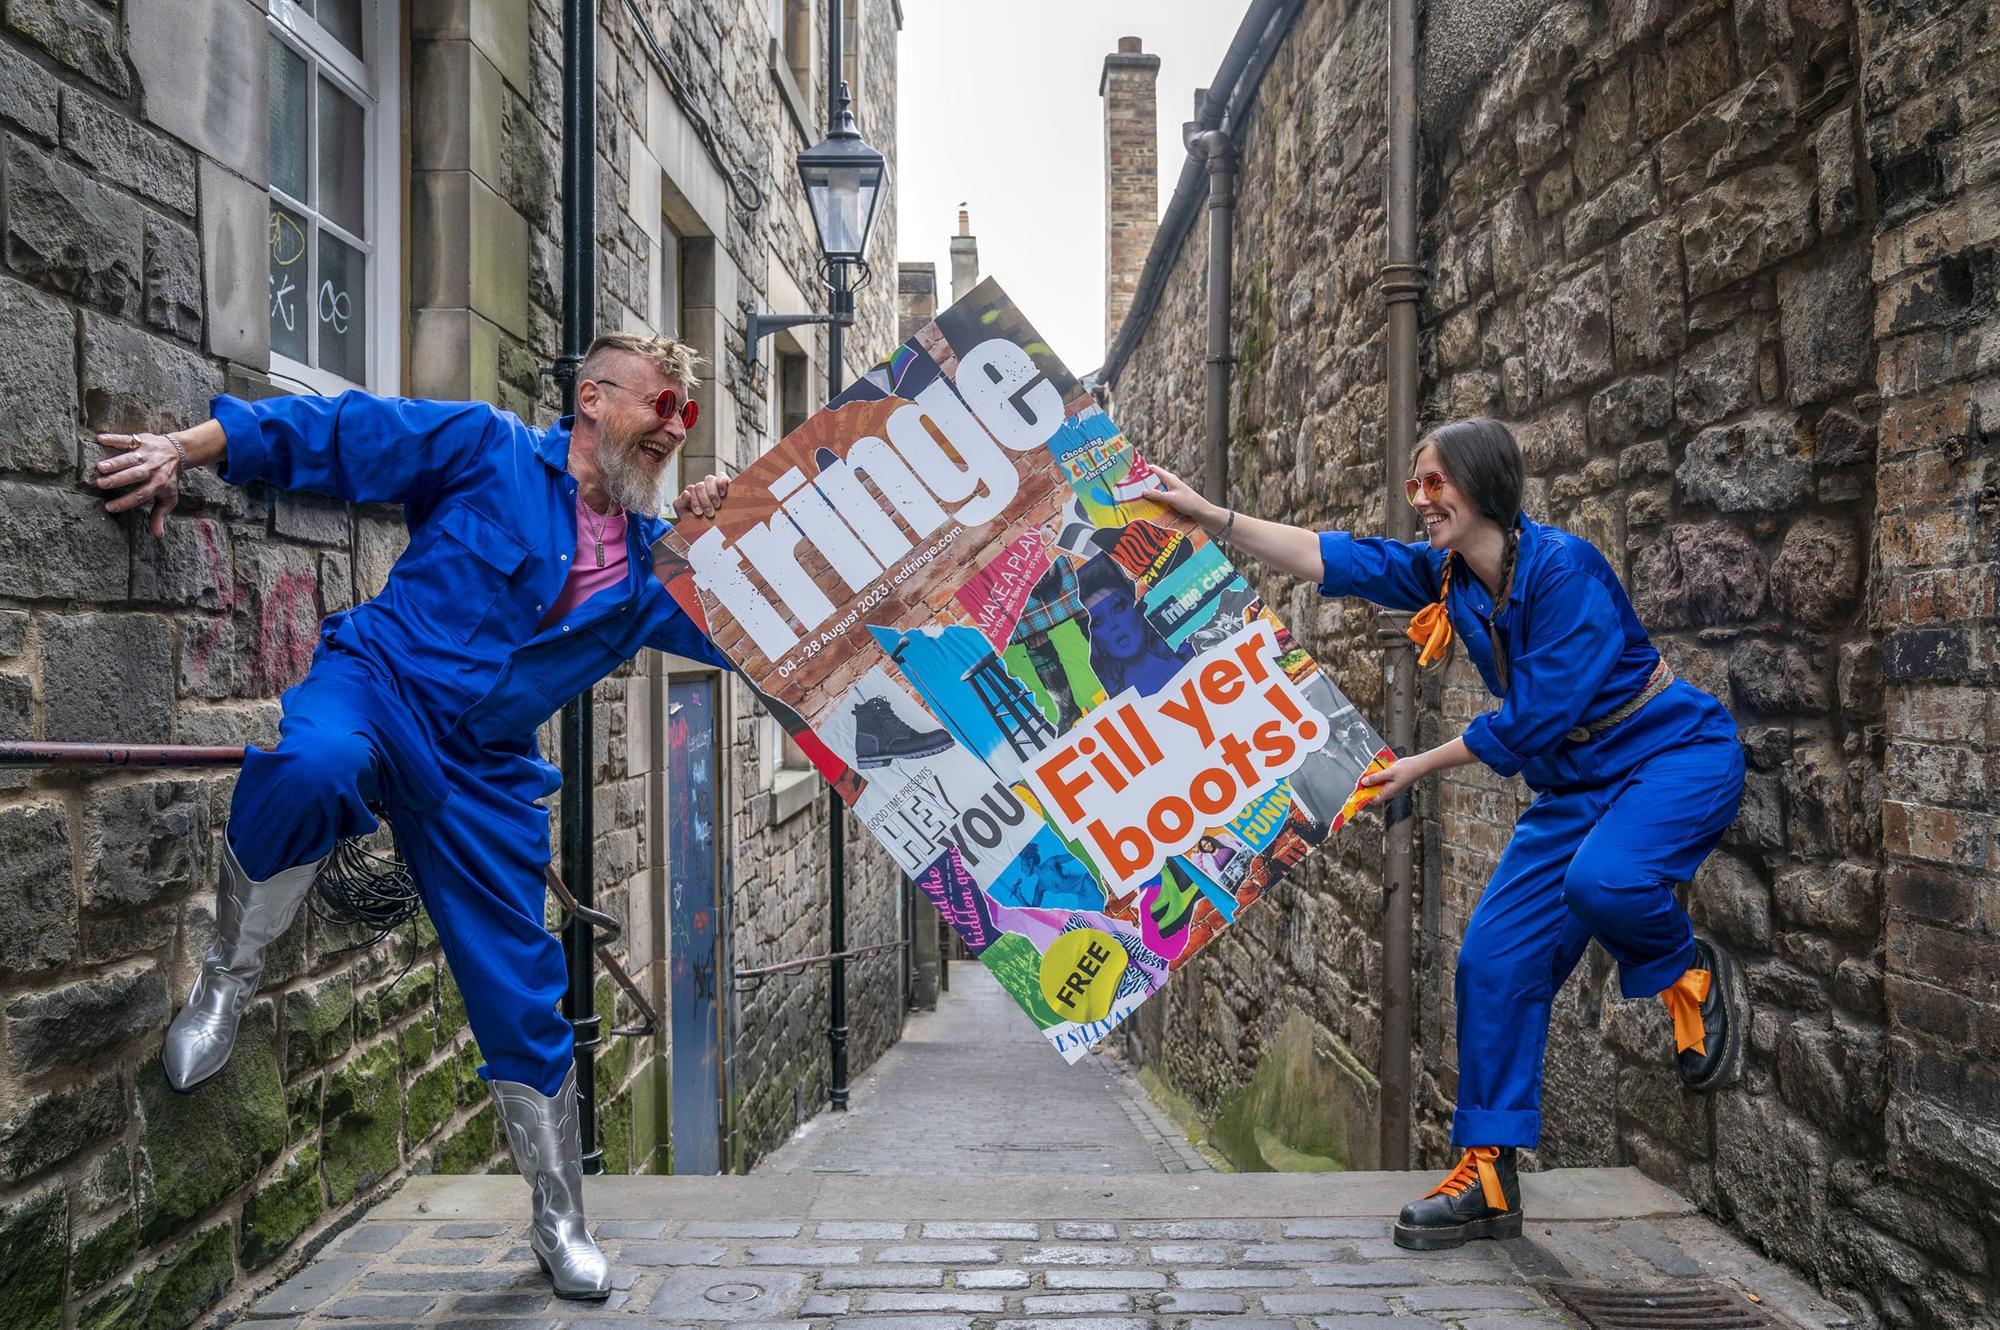 Edinburgh Festival Fringe: Chief Shona McCarthy insists ‘recovering’ event does not have to get bigger as she urges fairer funding deal